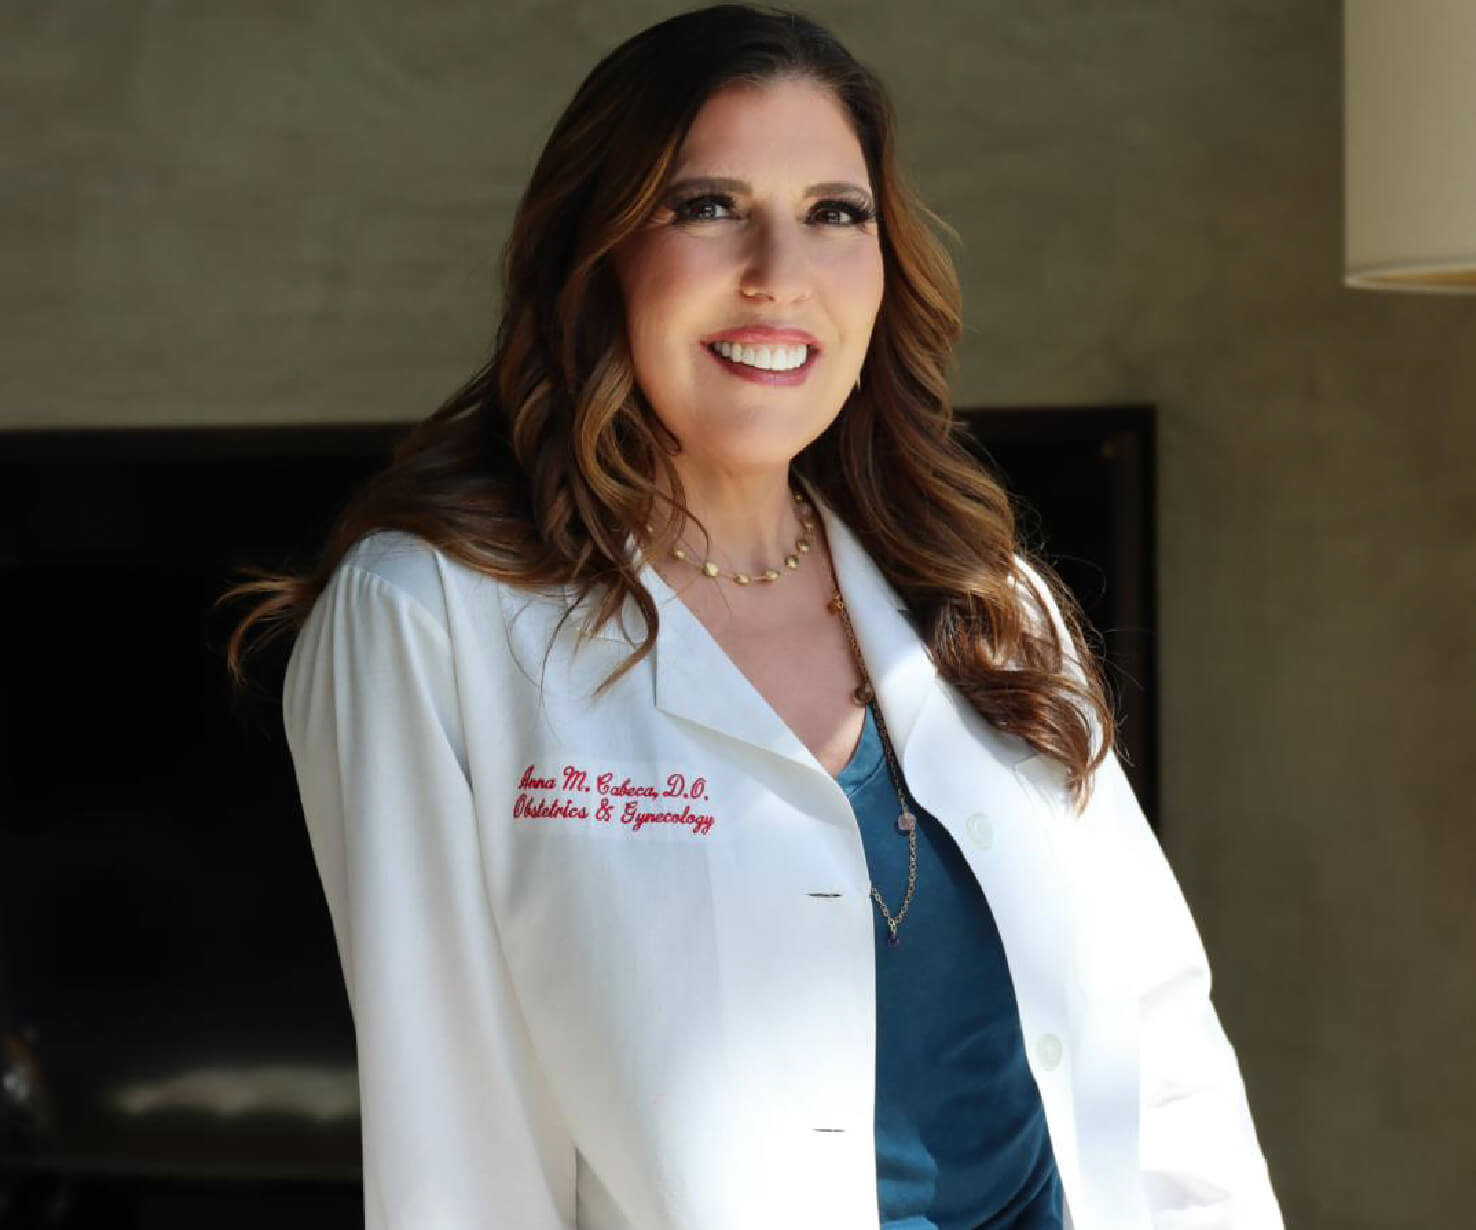 Dr Anna Cabeca - The Girlfriend Doctor